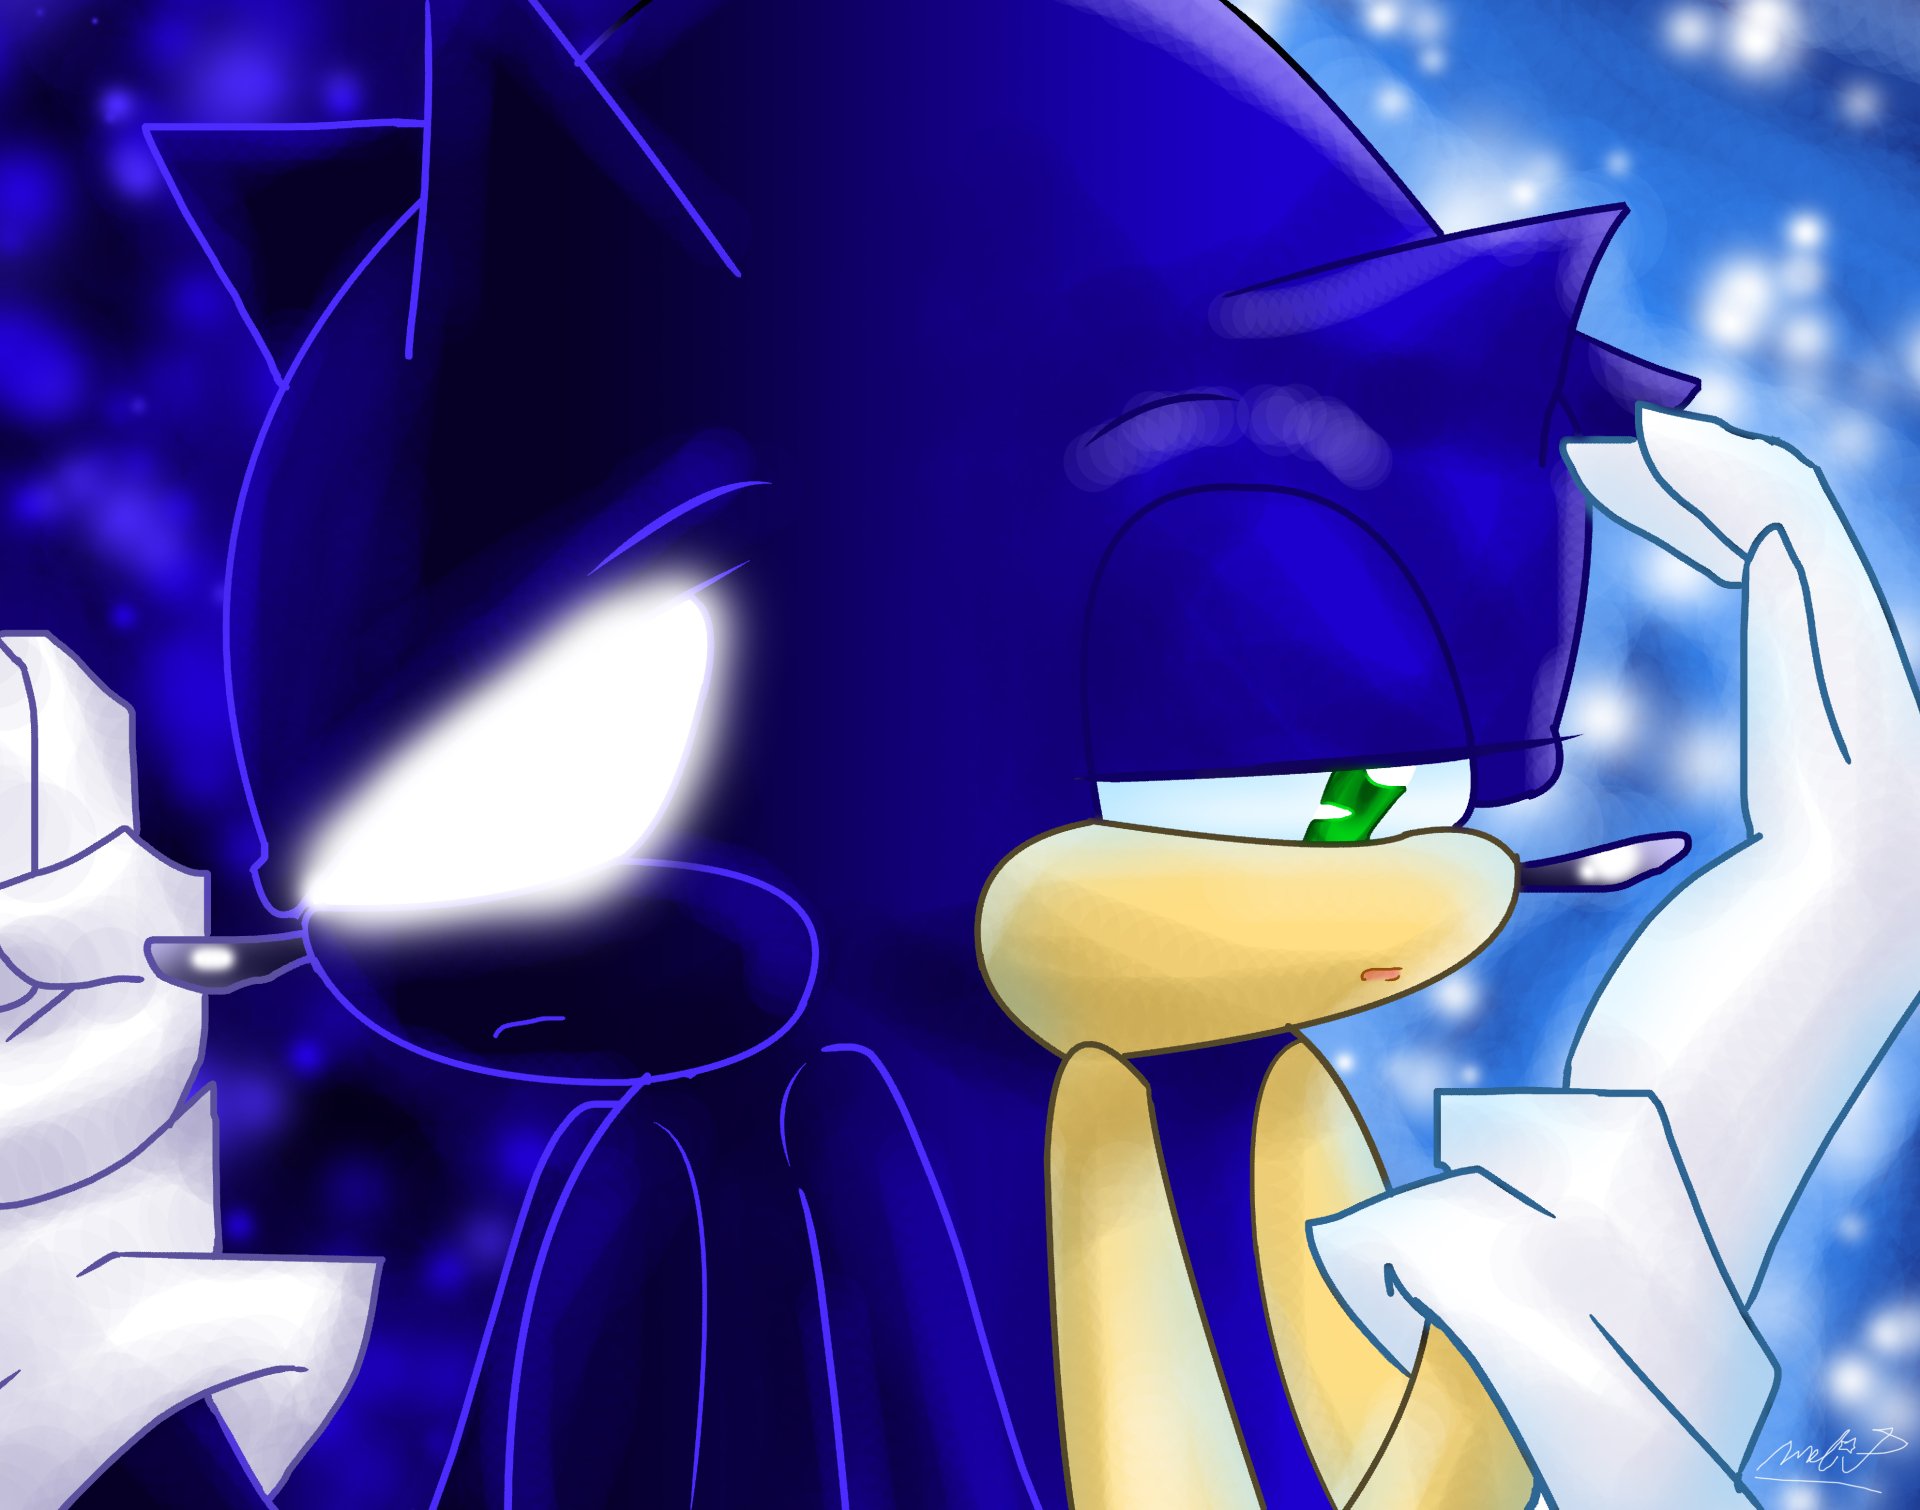 Sonic and Mario Channel OnePunch Man with This Hilarious Video